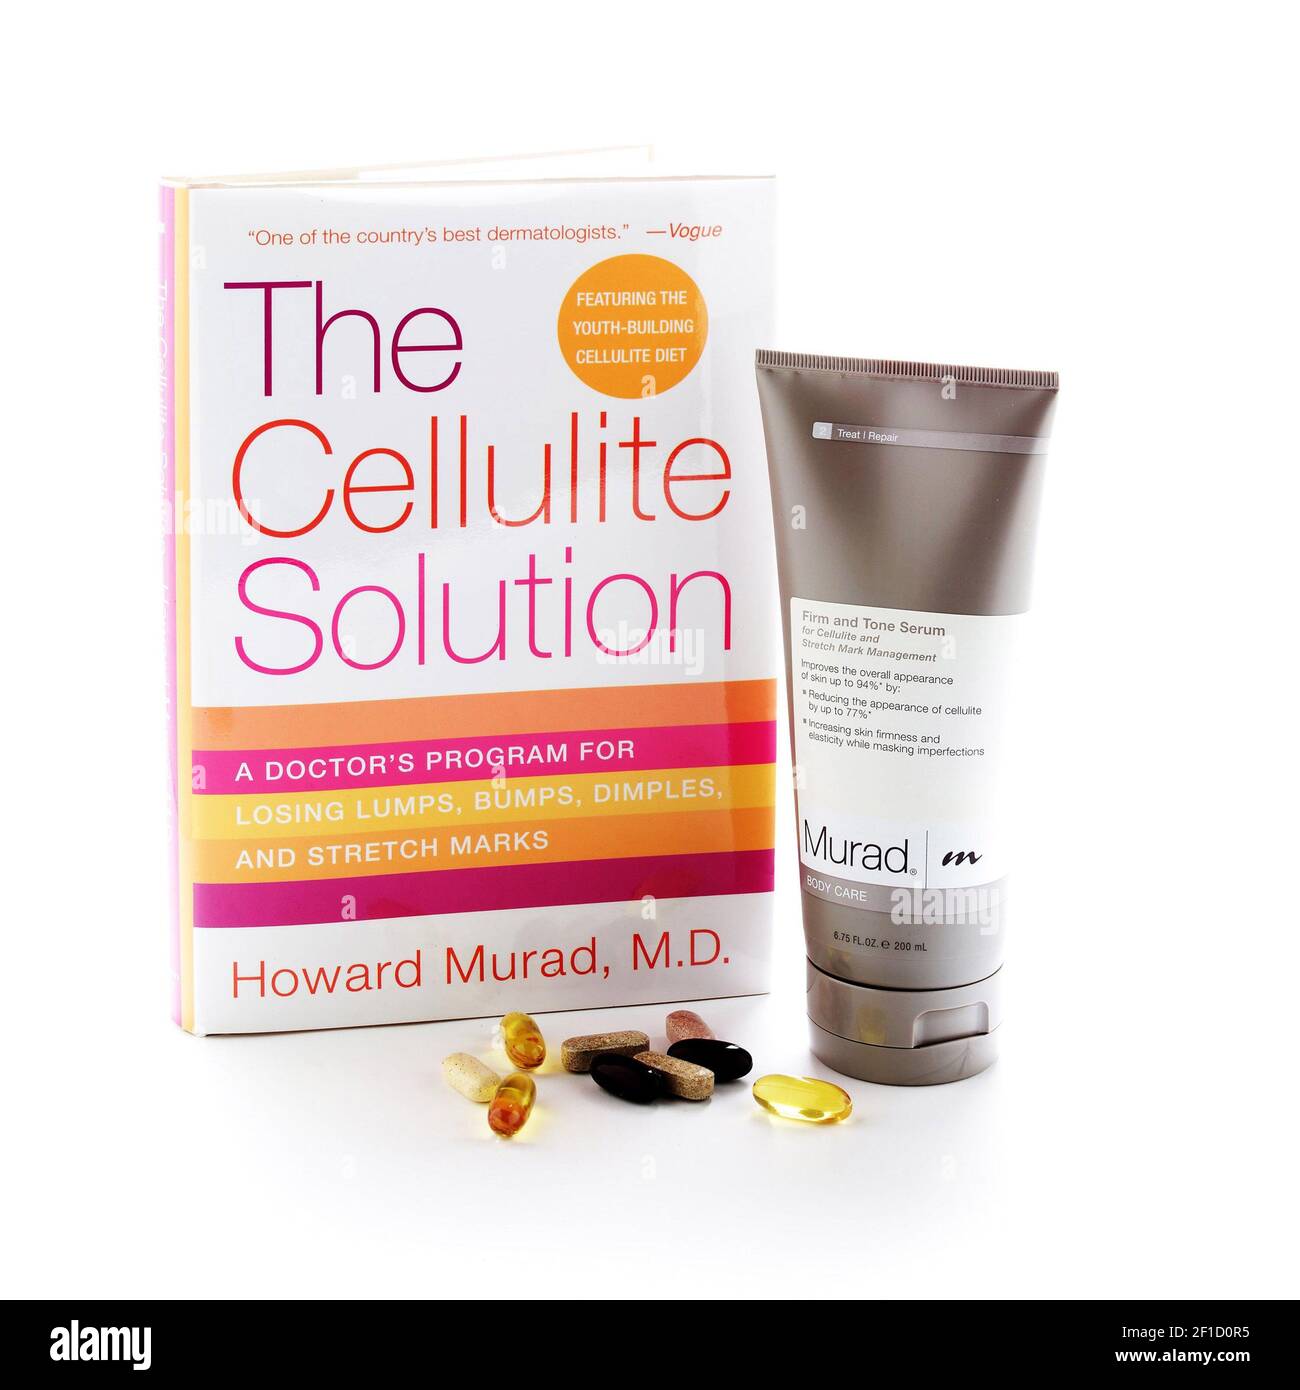 Blinke misundelse Sump Cellulite is the latest battlefront for Dr. Howard Murad, who launched his  trailblazing skin-care line in 1989. The "Cellulite Solution" package  includes his 2005 book, Firm and Tone Dietary Supplement Pack, and